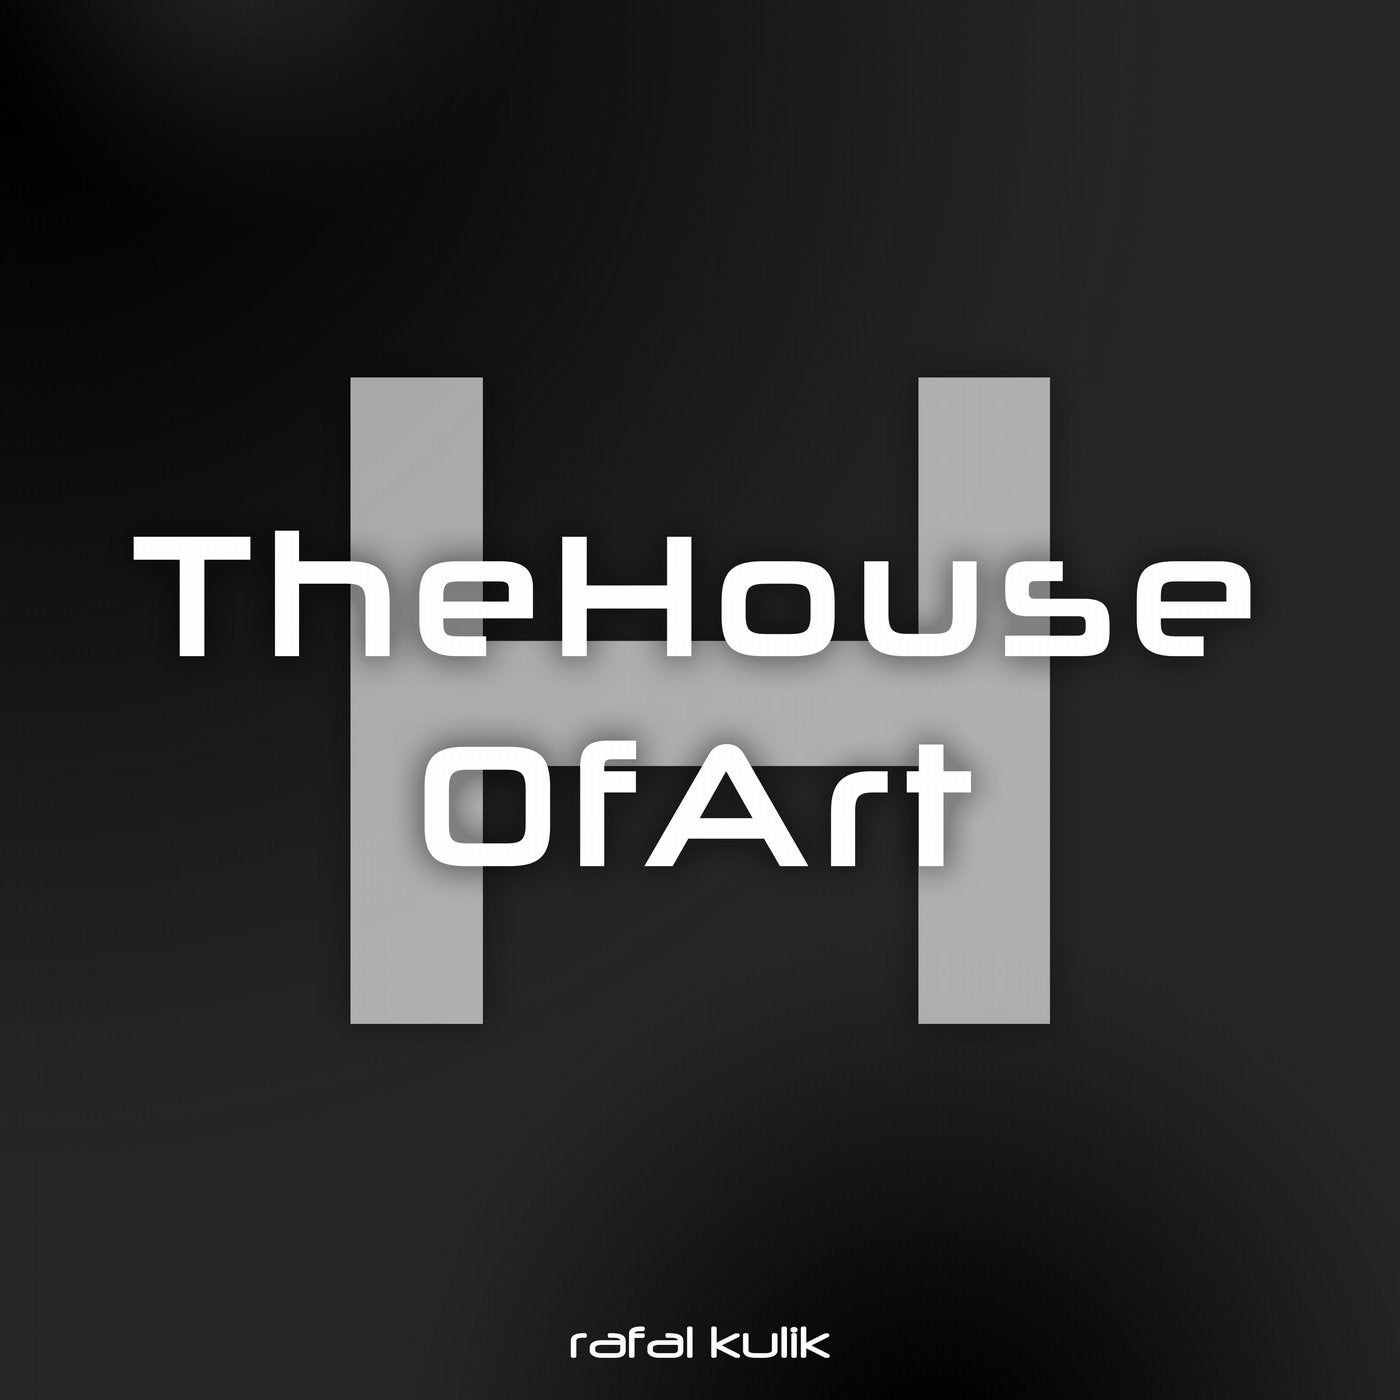 The House of Art